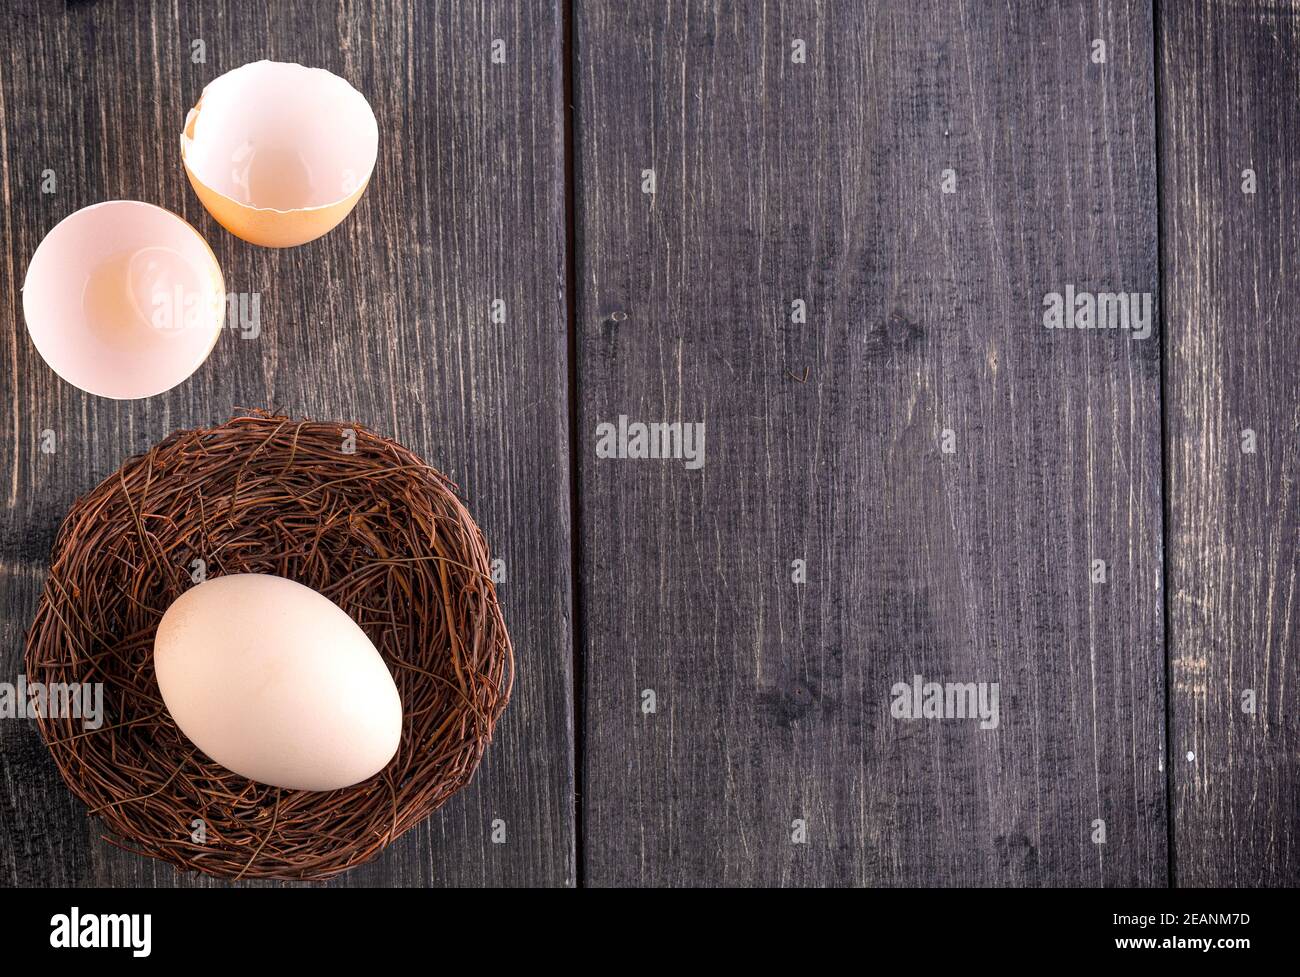 The white egg on the nest on the old wooden background Stock Photo